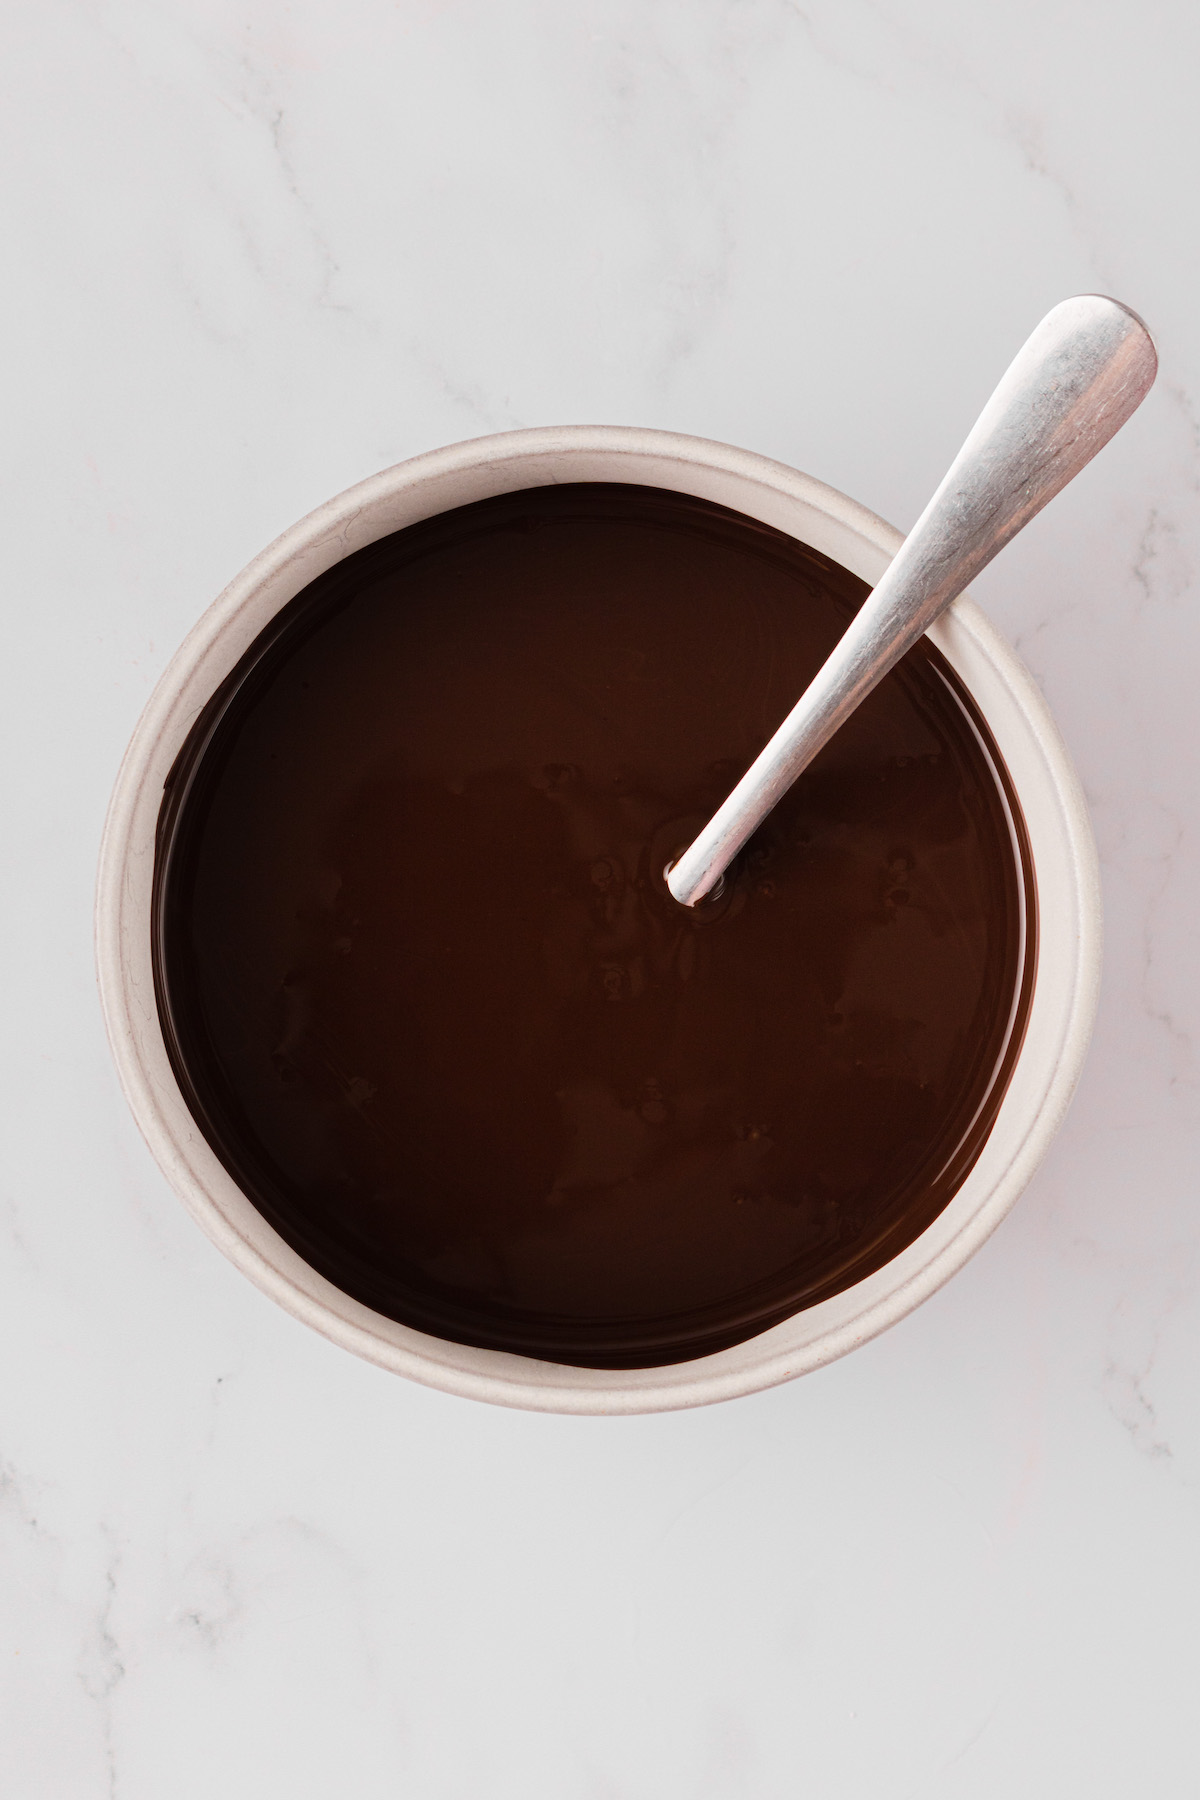 Overhead view of melted chocolate in bowl with spoon